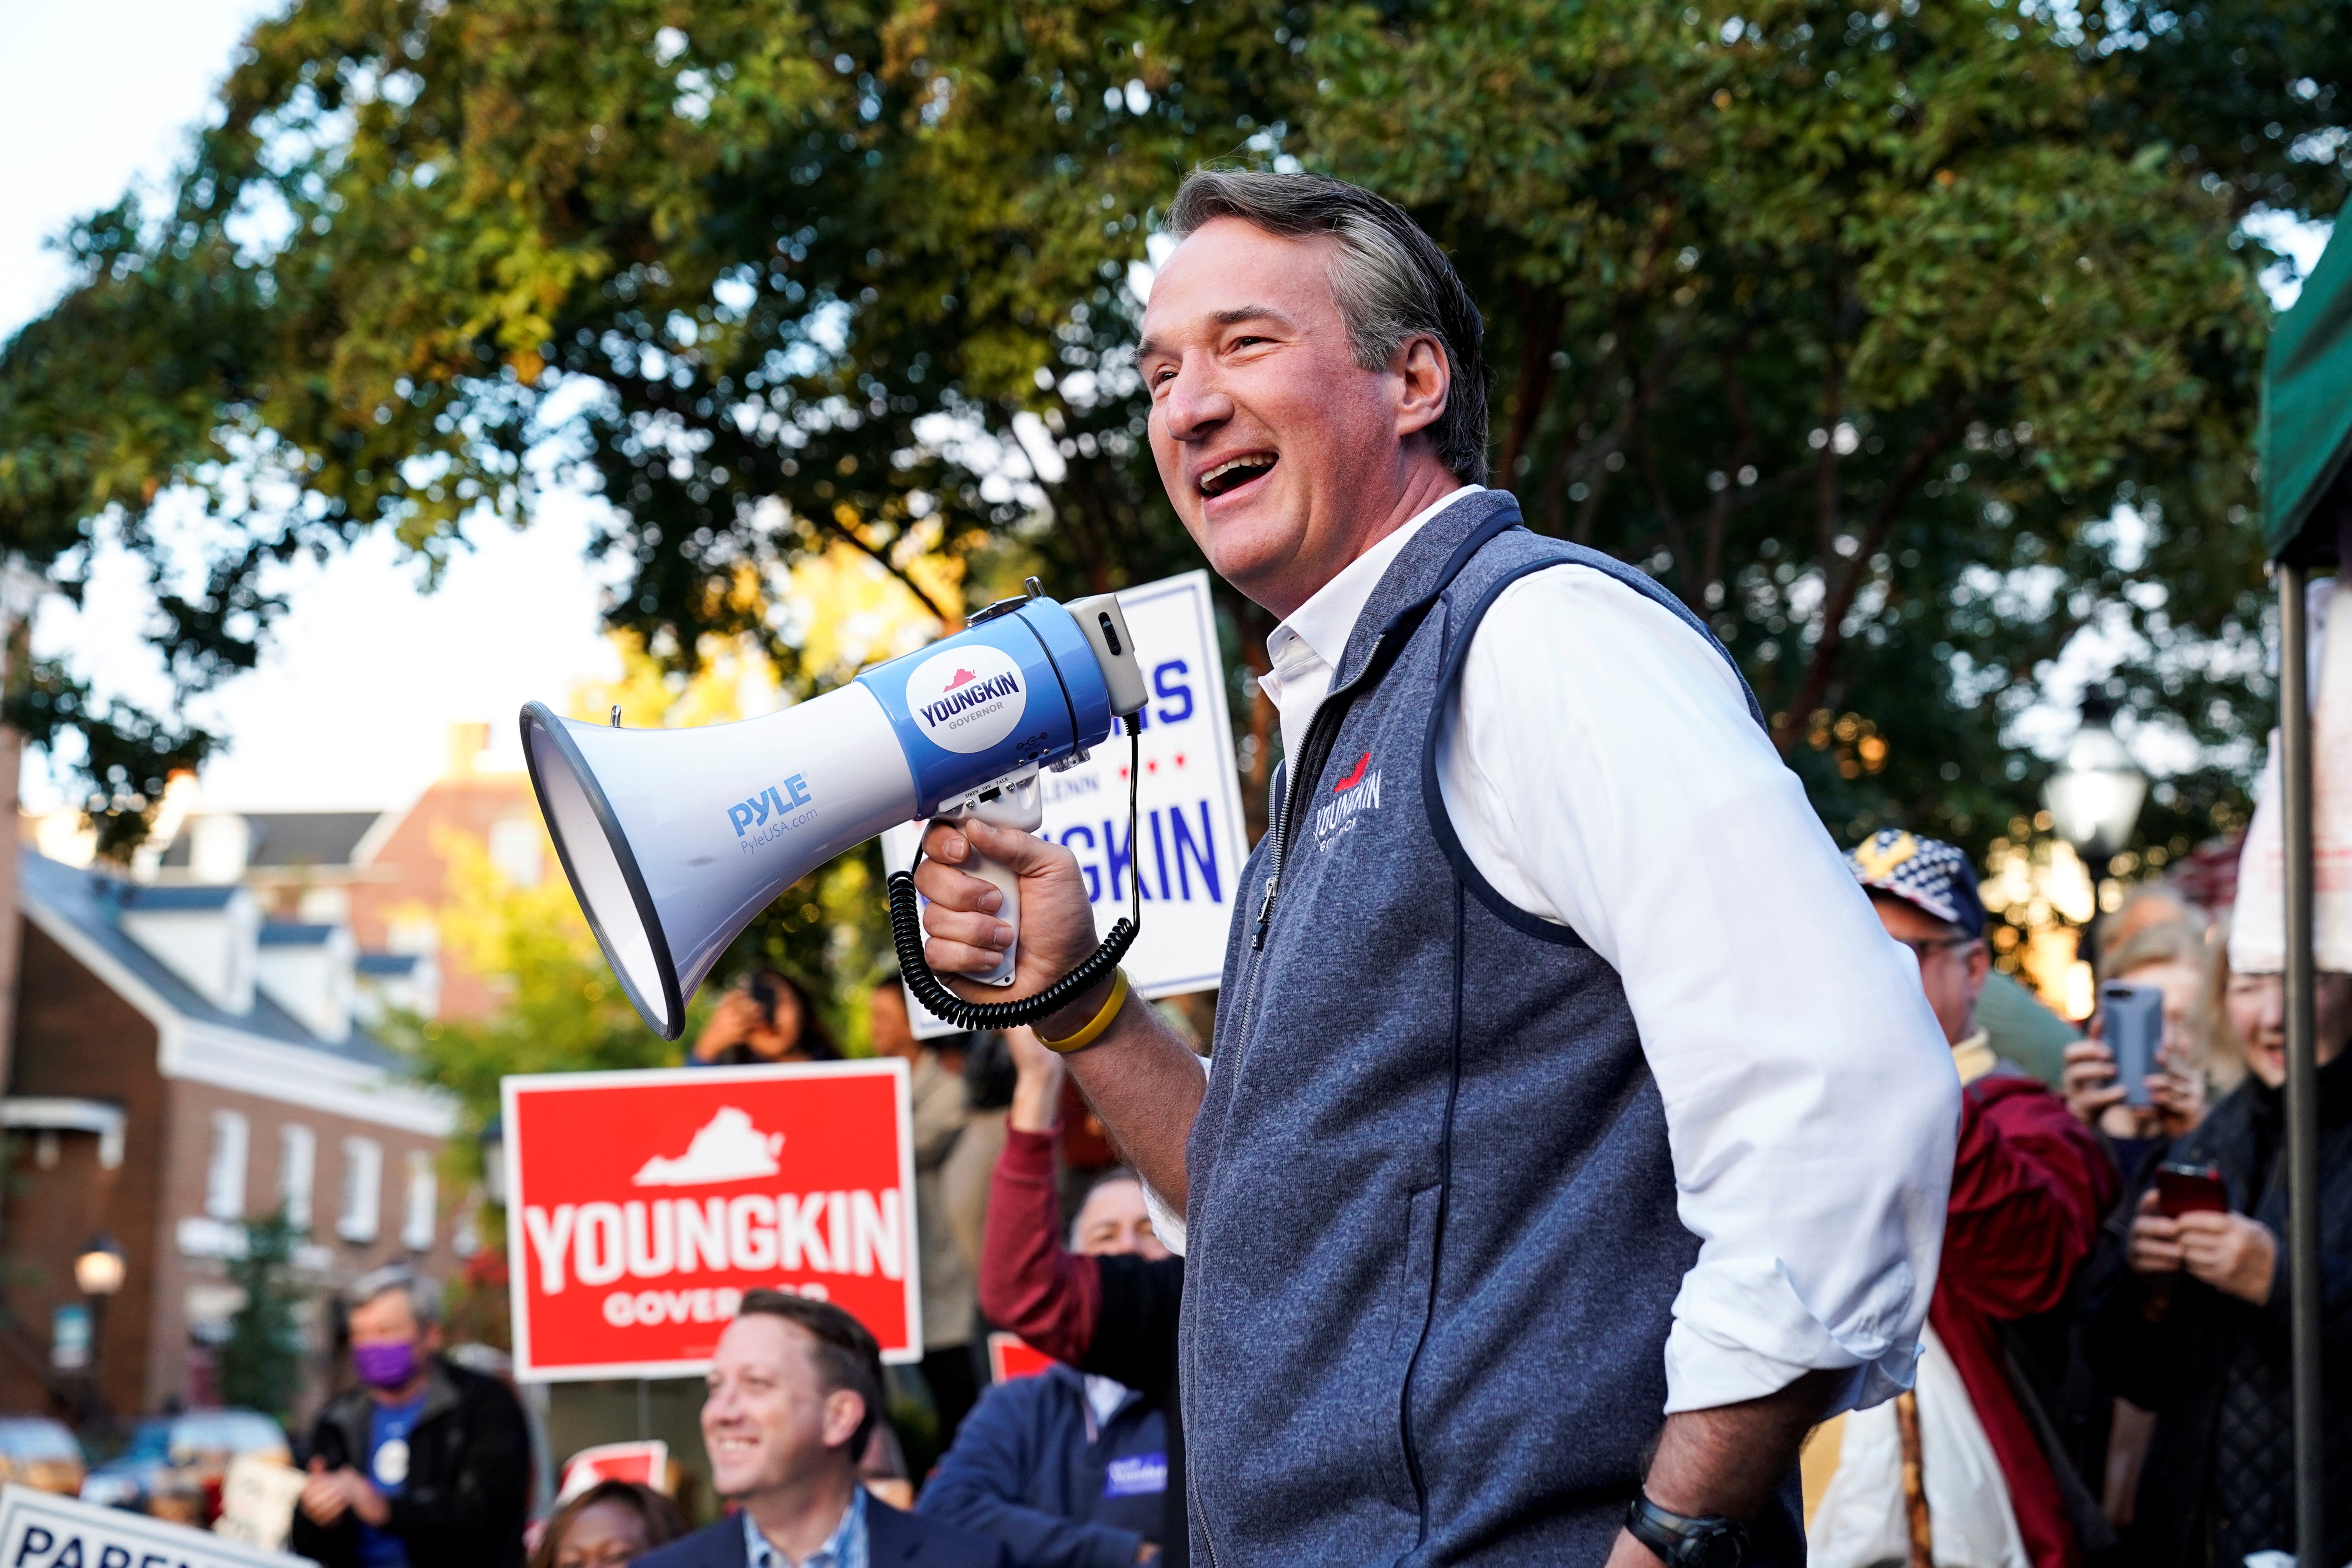 Republicans eye Youngkin playbook to win US House seats in Virginia